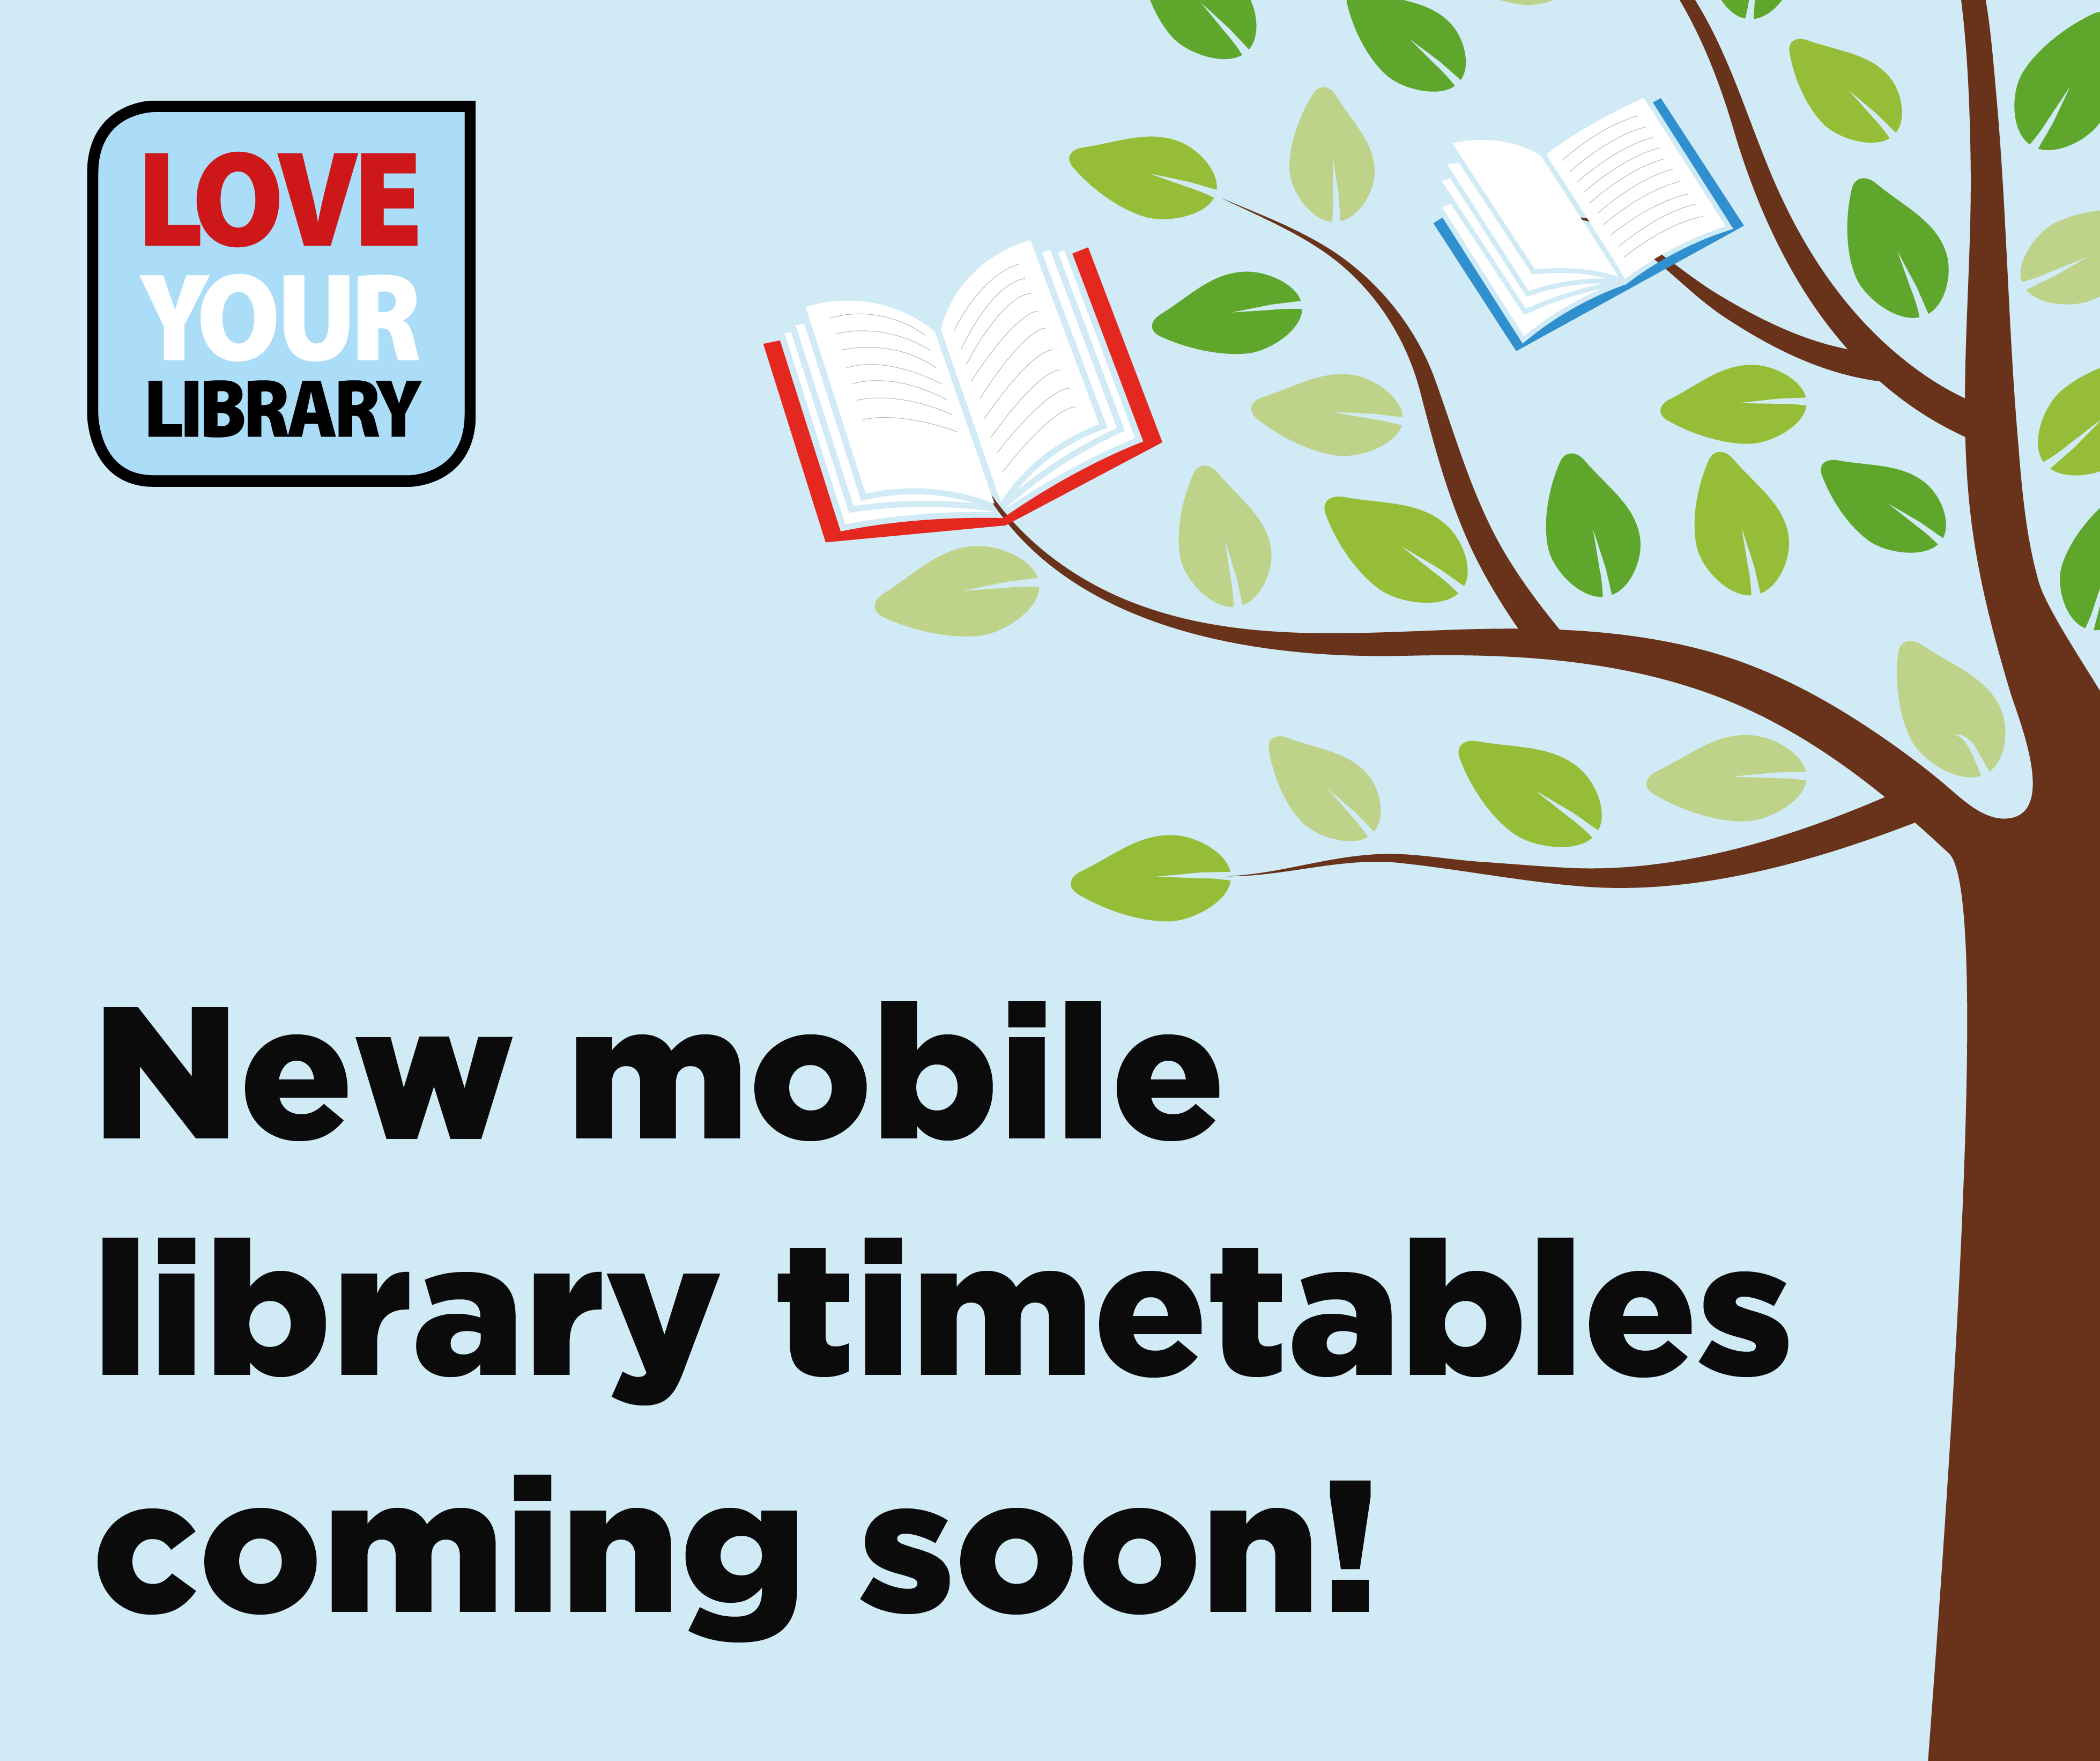 "New mobile library timetables coming soon" text.